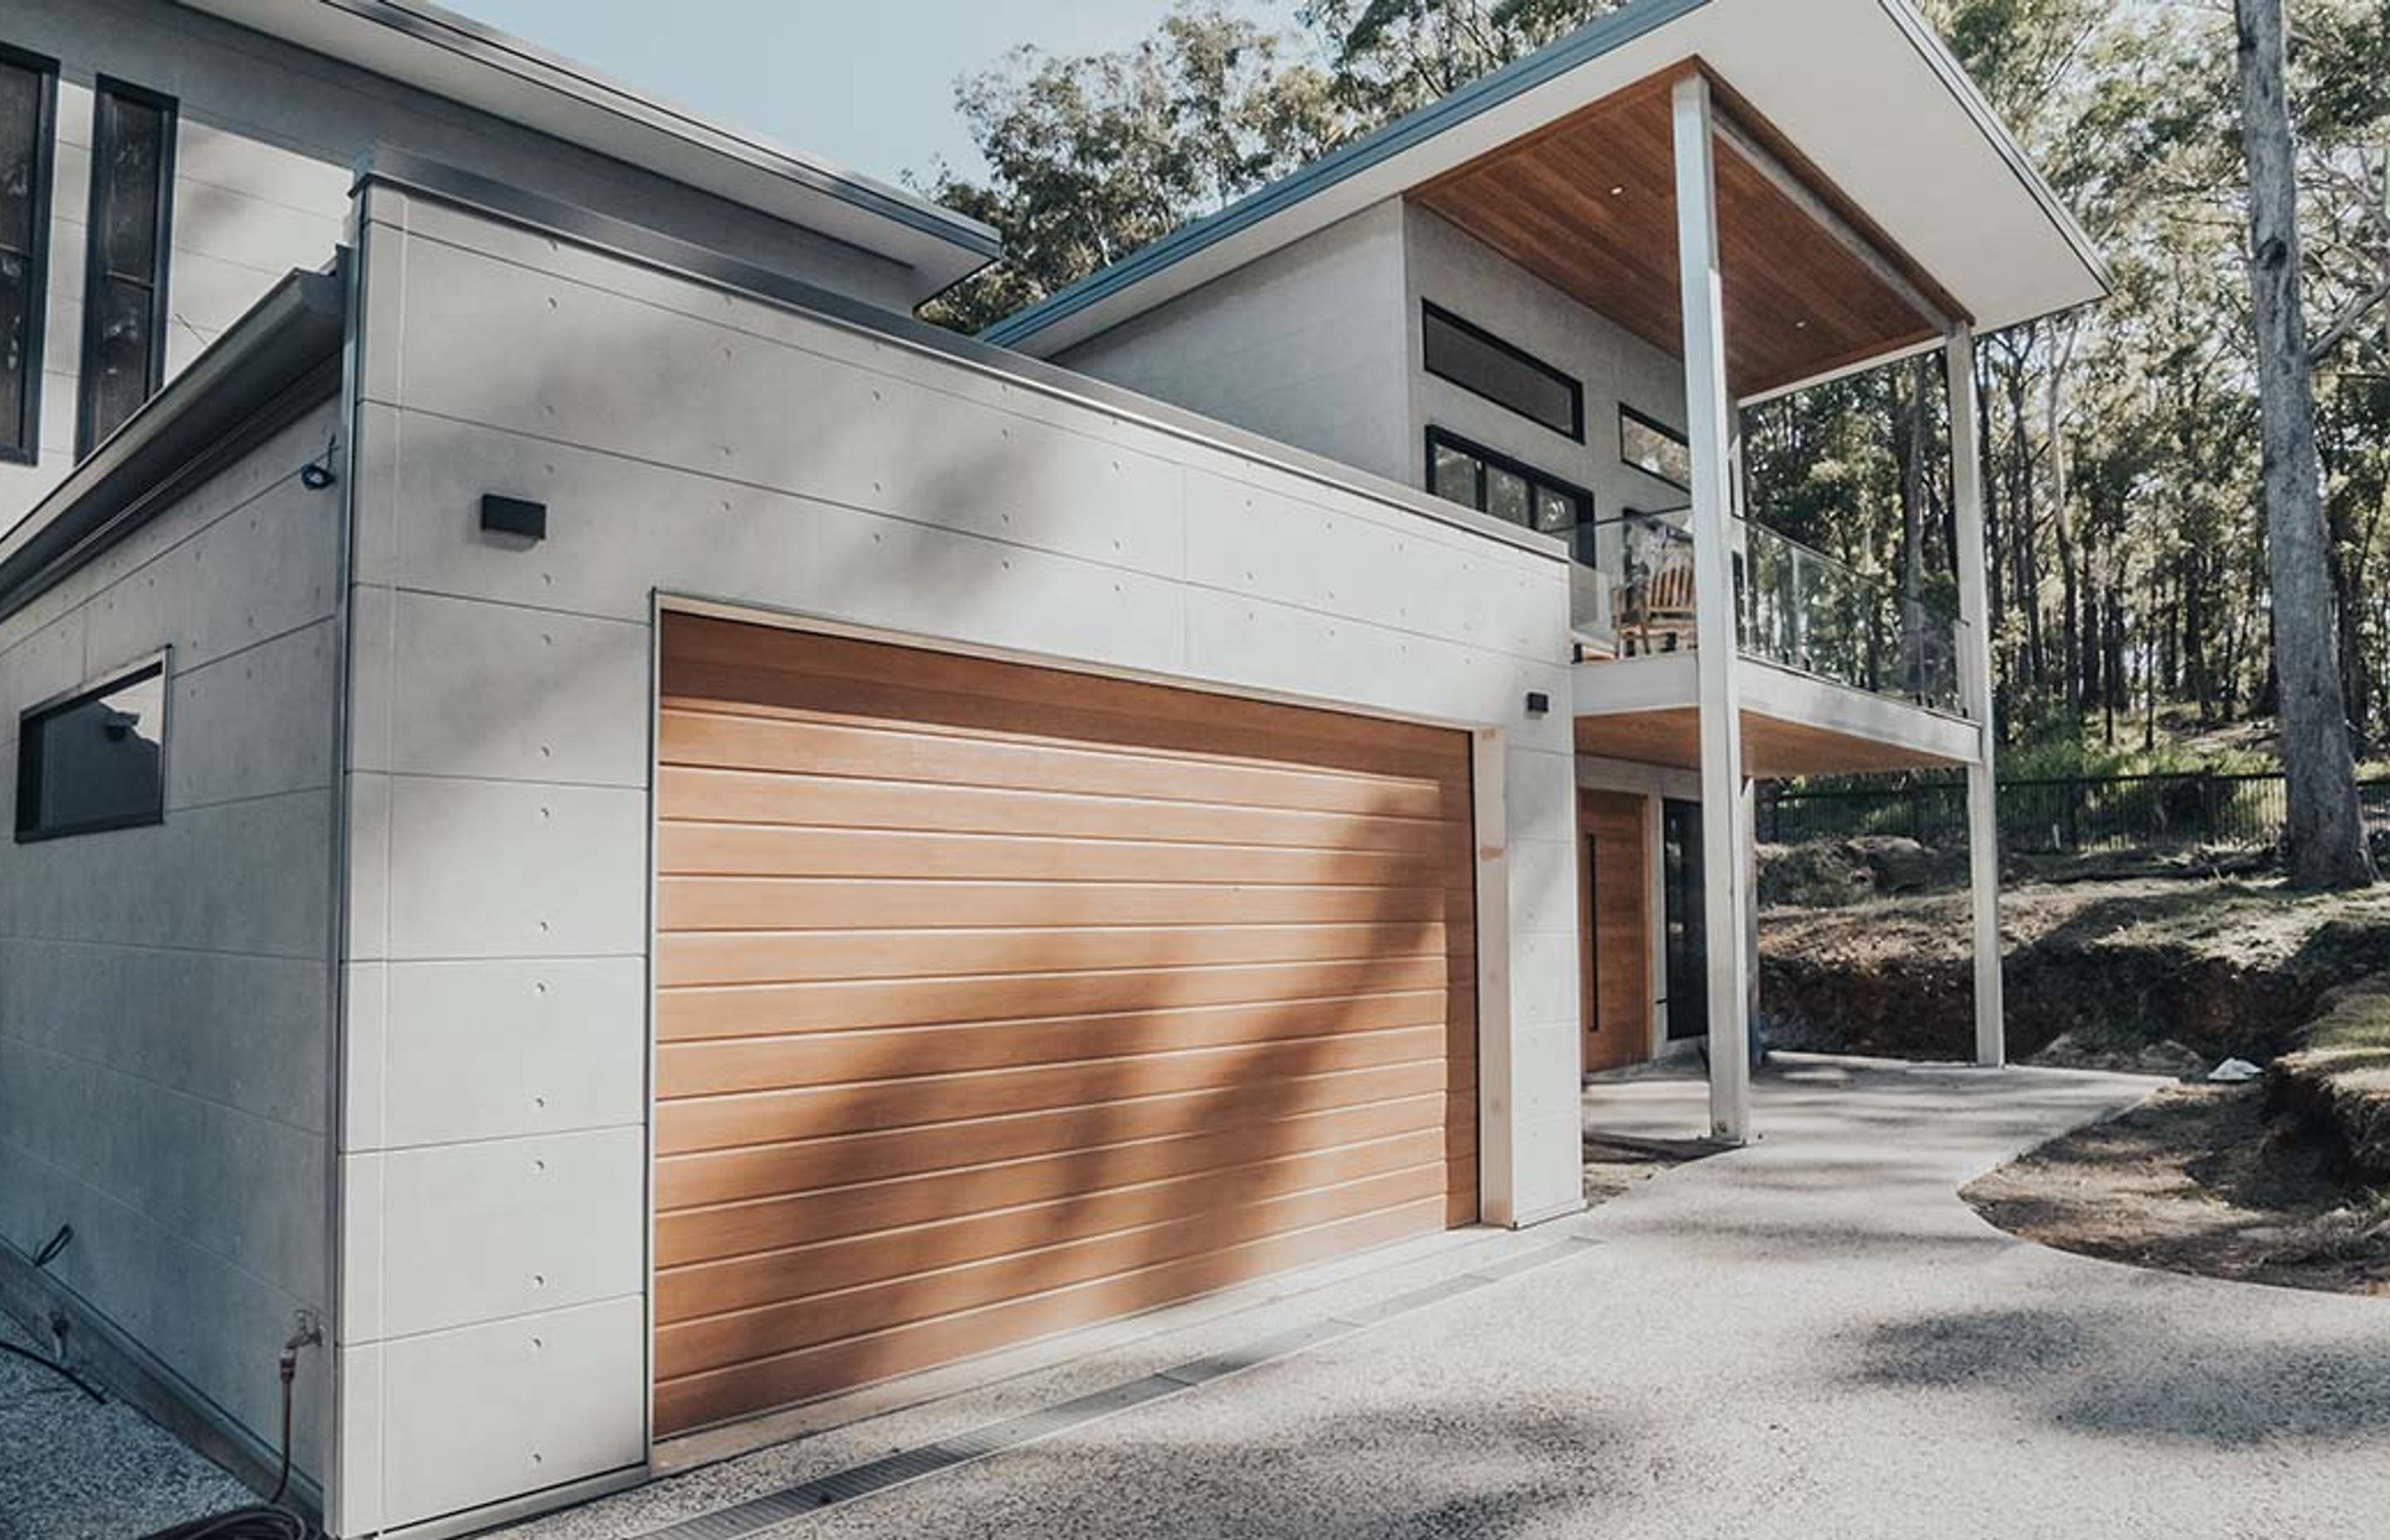 5 Ways to get your Garage ready for the New Year